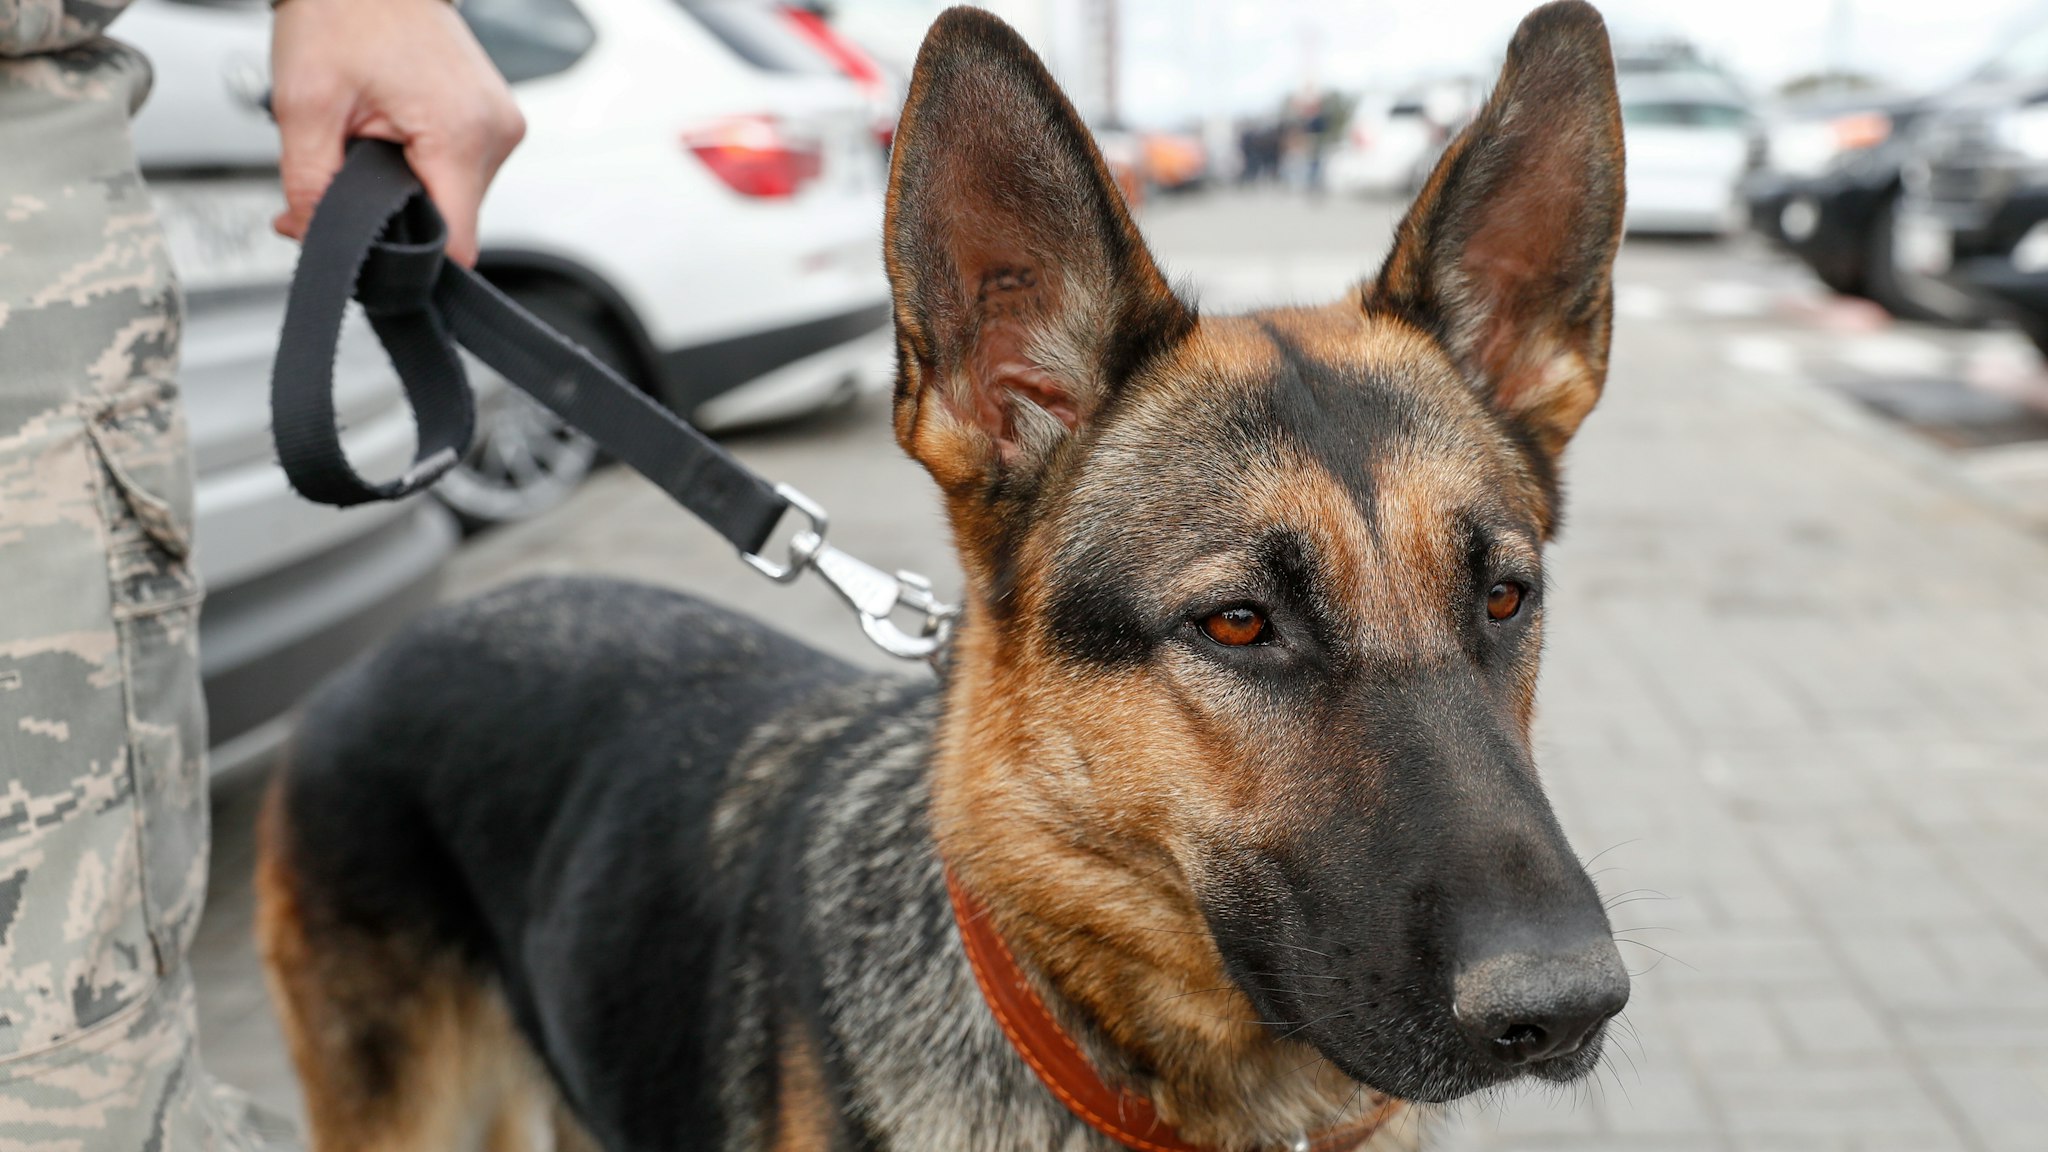 MOSCOW REGION, RUSSIA - SEPTEMBER 27, 2018: A police dog at Moscow's Domodedovo Airport. Artyom Geodakyan/TASS (Photo by Artyom Geodakyan\TASS via Getty Images)